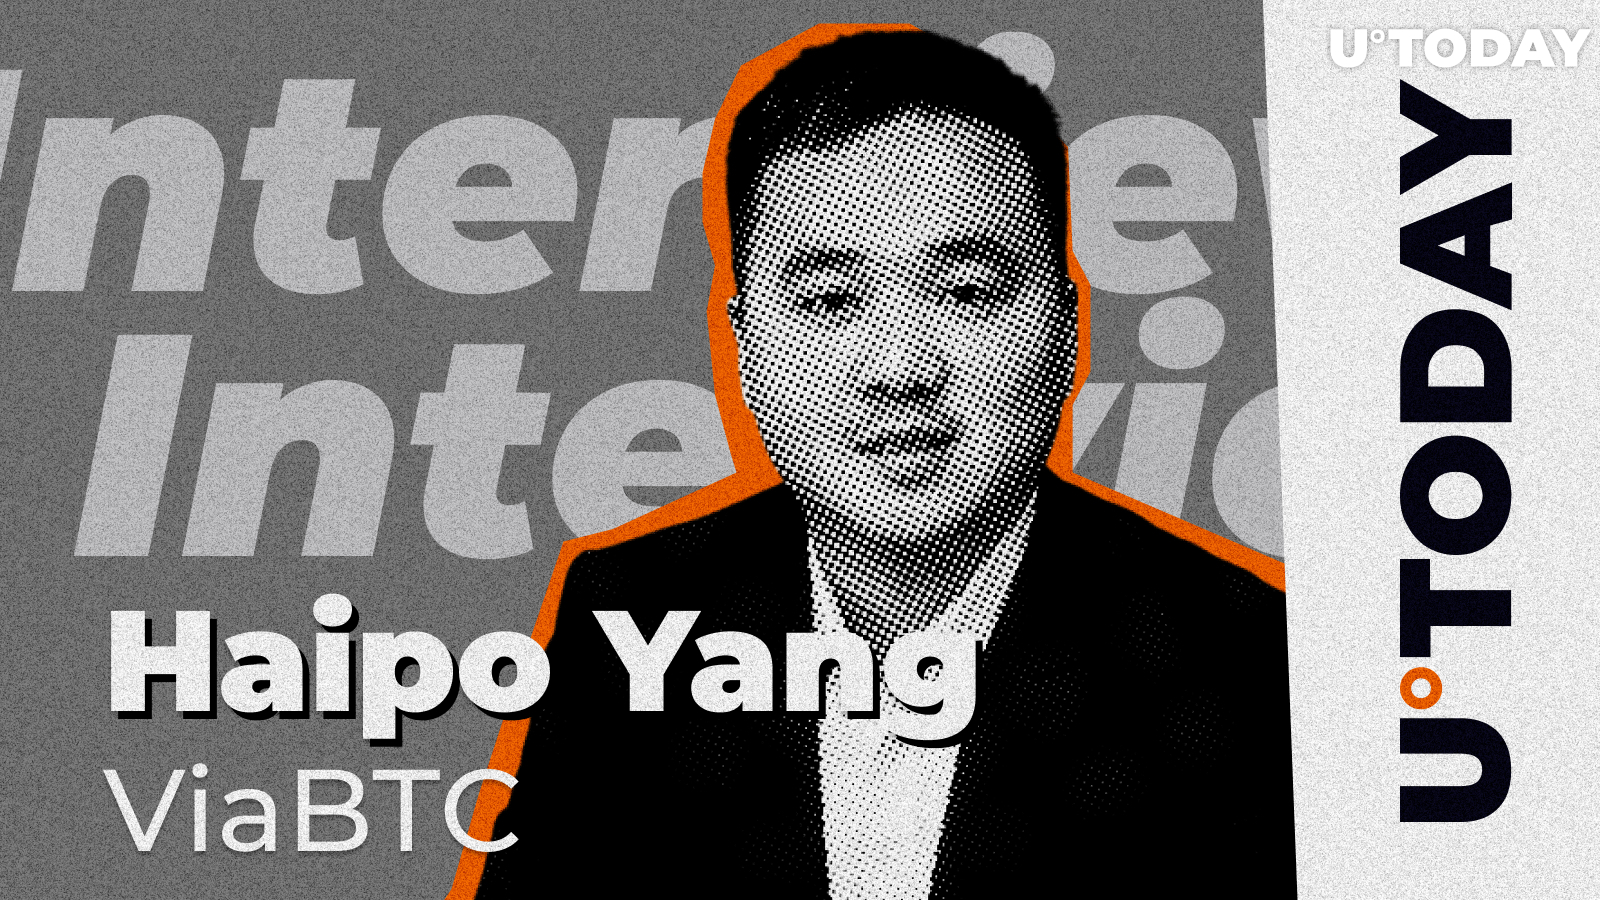 ViaBTC Turns Eight: What's Next for Leading Mining Platform? Interview With ViaBTC CEO Haipo Yang